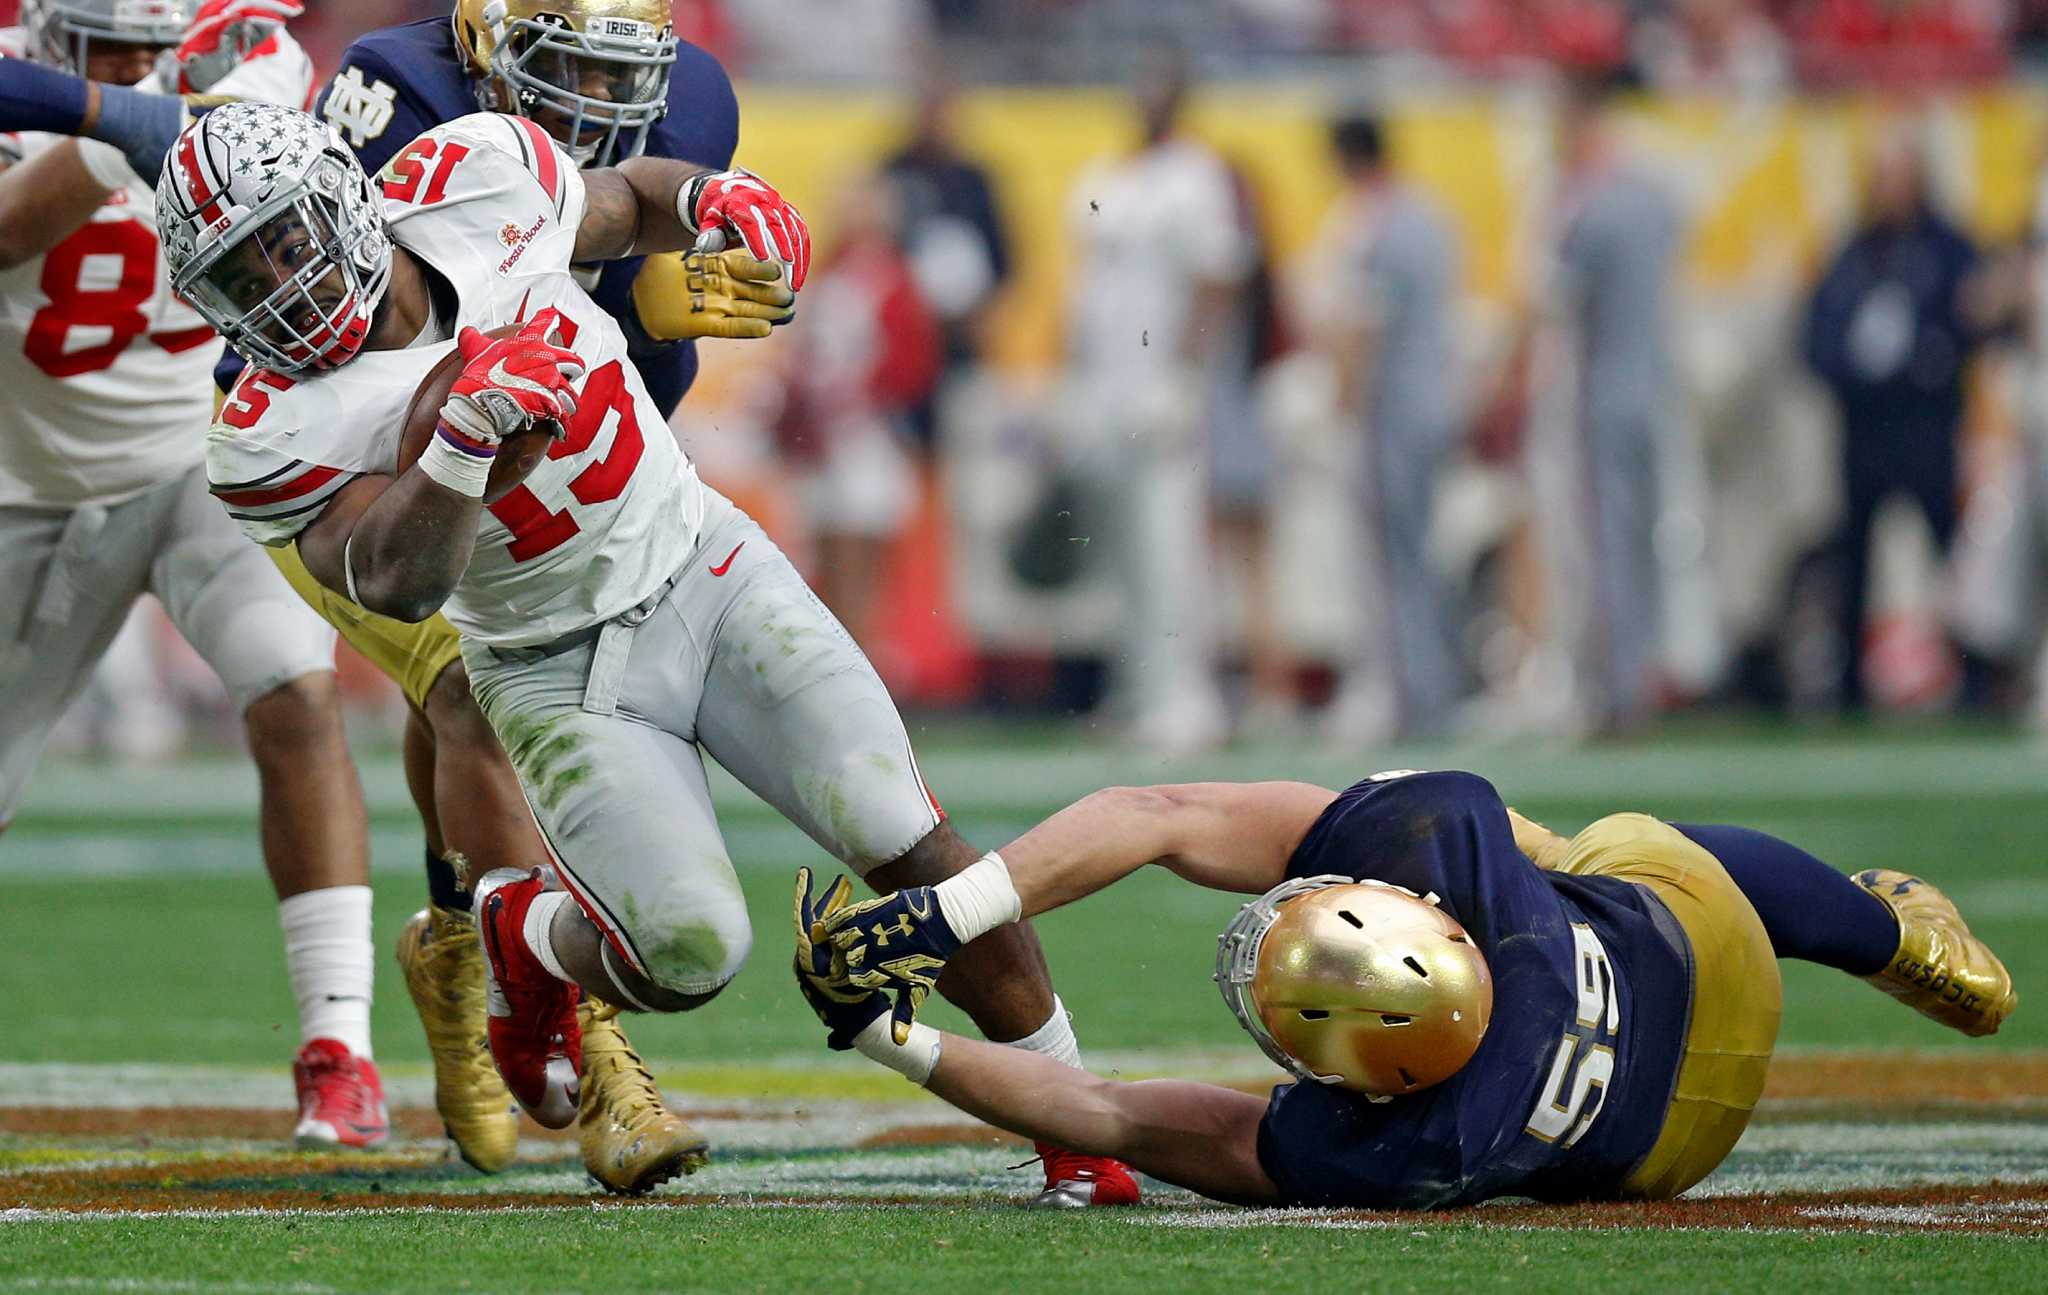 Ohio State star Bosa ejected from Fiesta Bowl for targeting